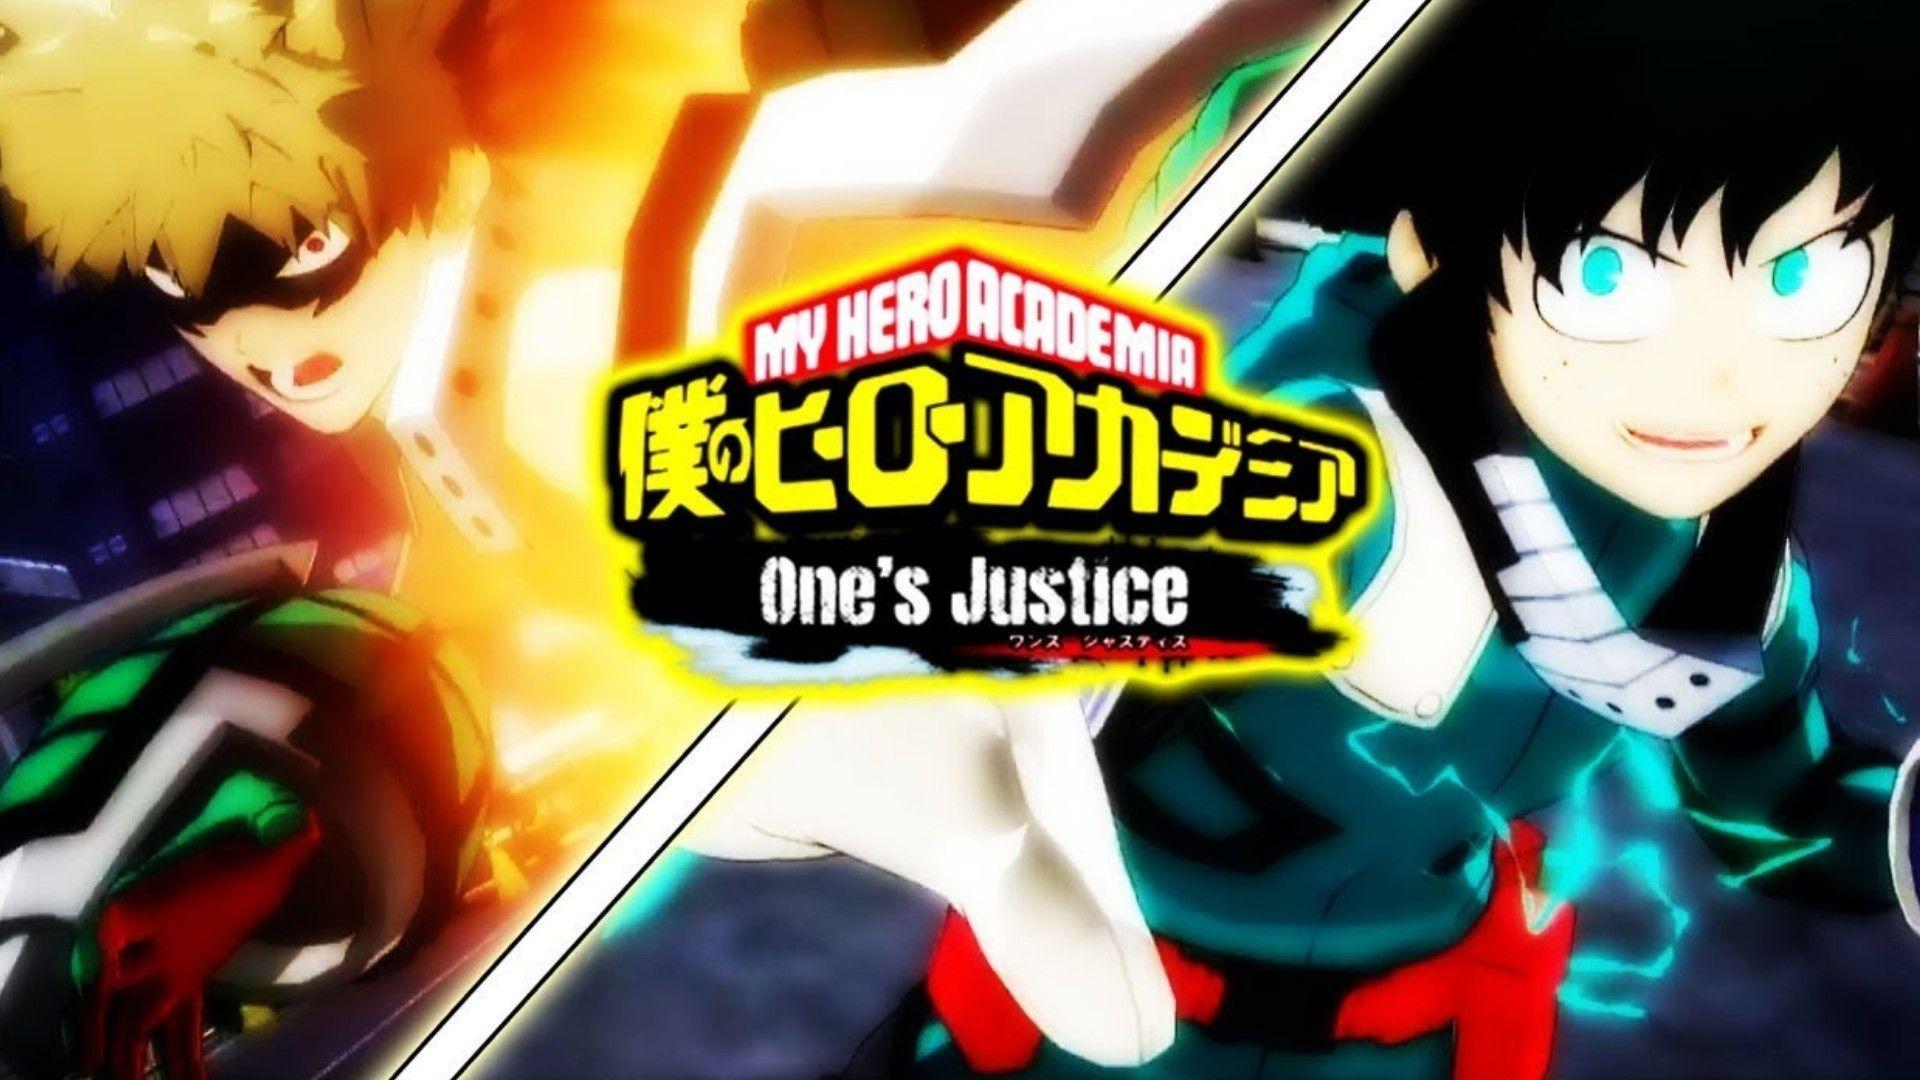 MY HERO ONE'S JUSTICE ADDS DEKU SHOOT STYLE !! #anime #ps4